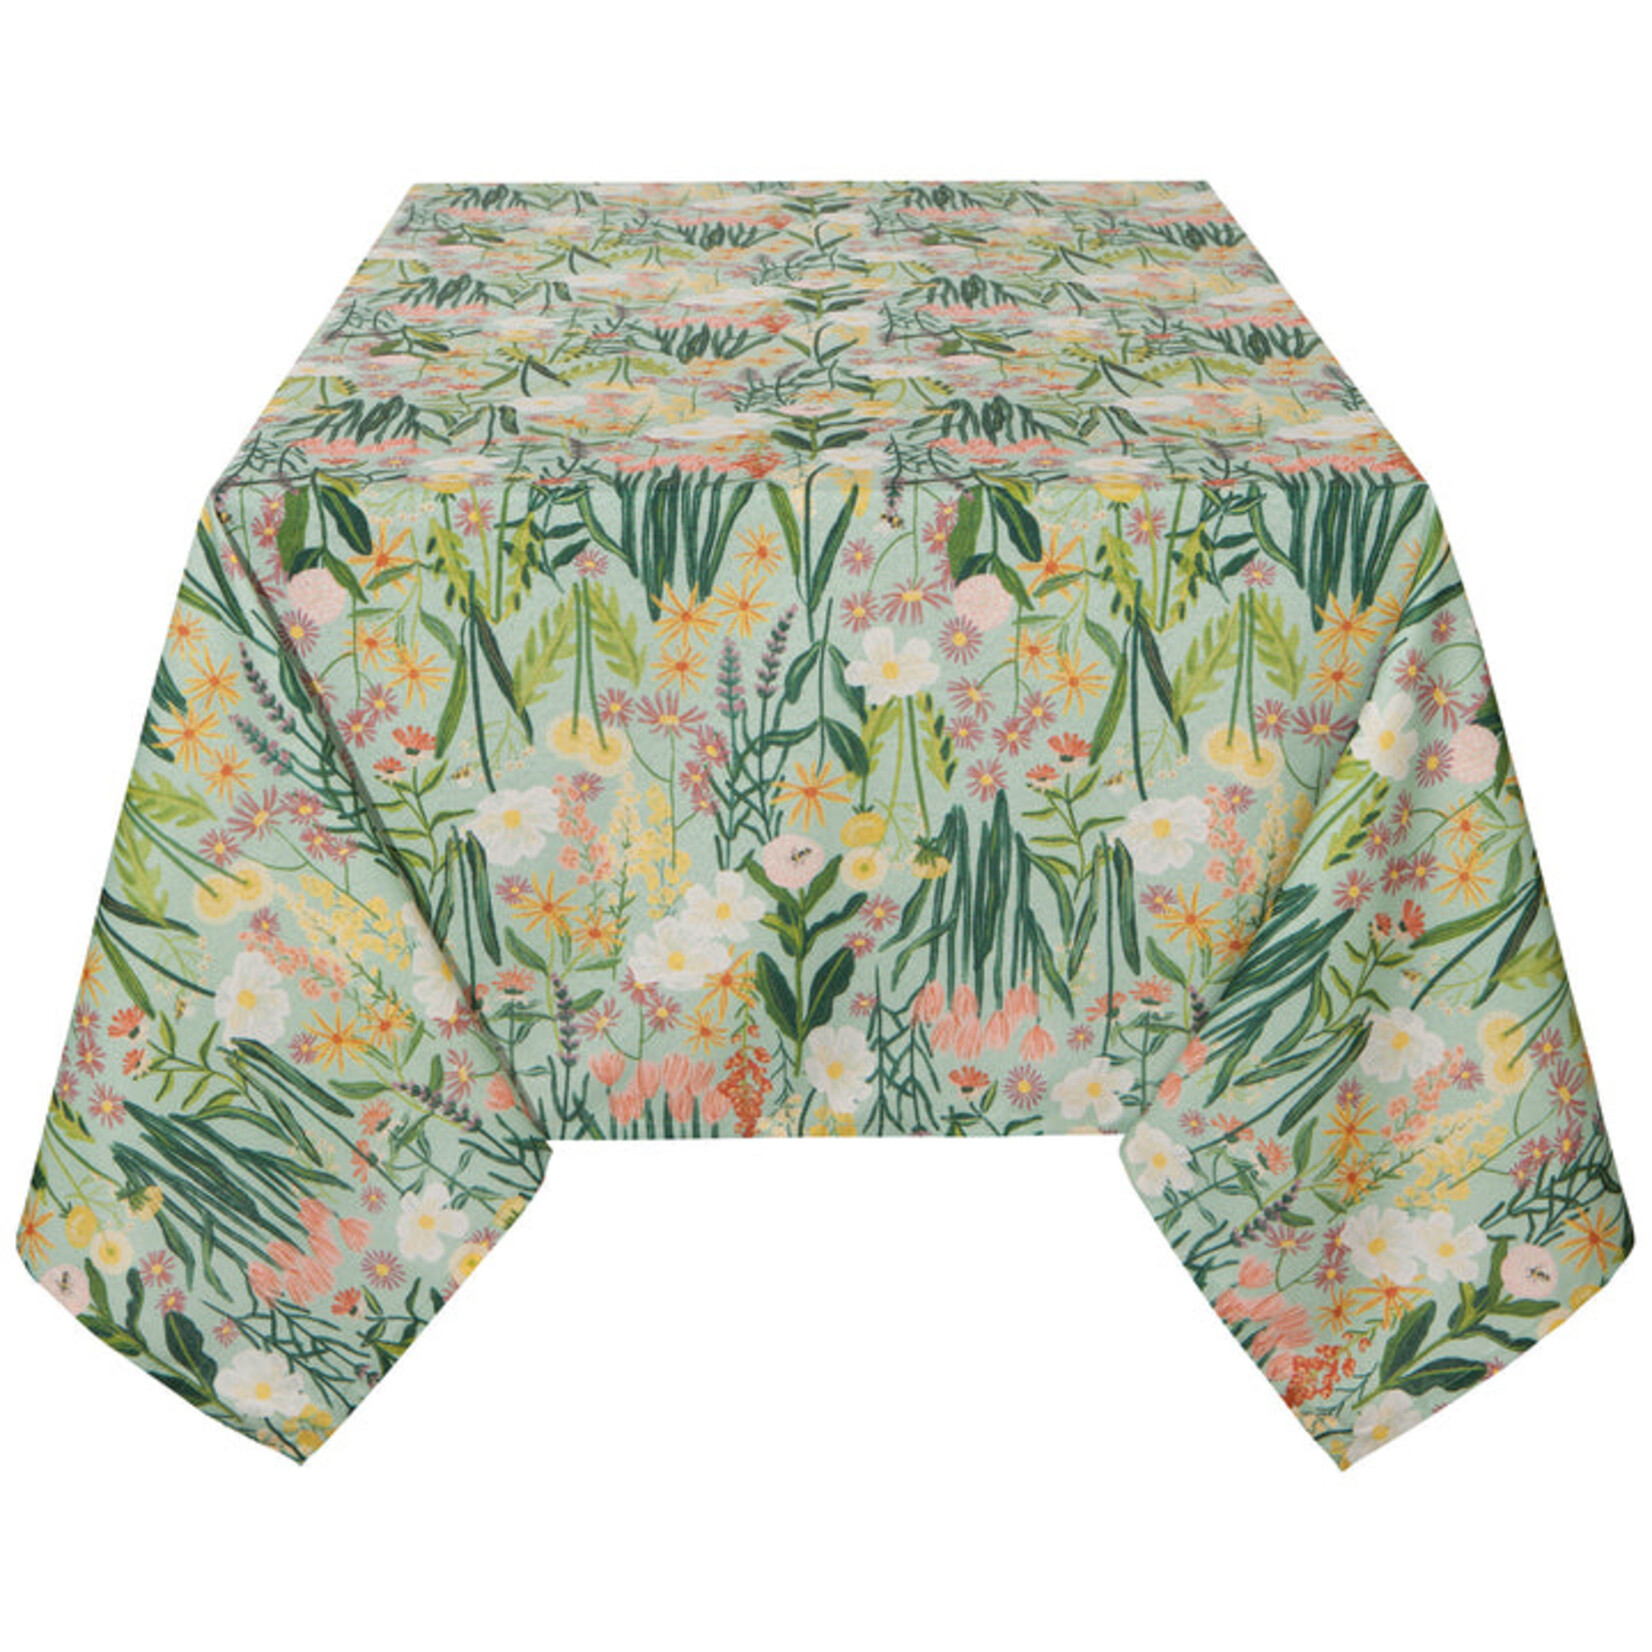 Bees & Bloom 60x90 Tablecloth